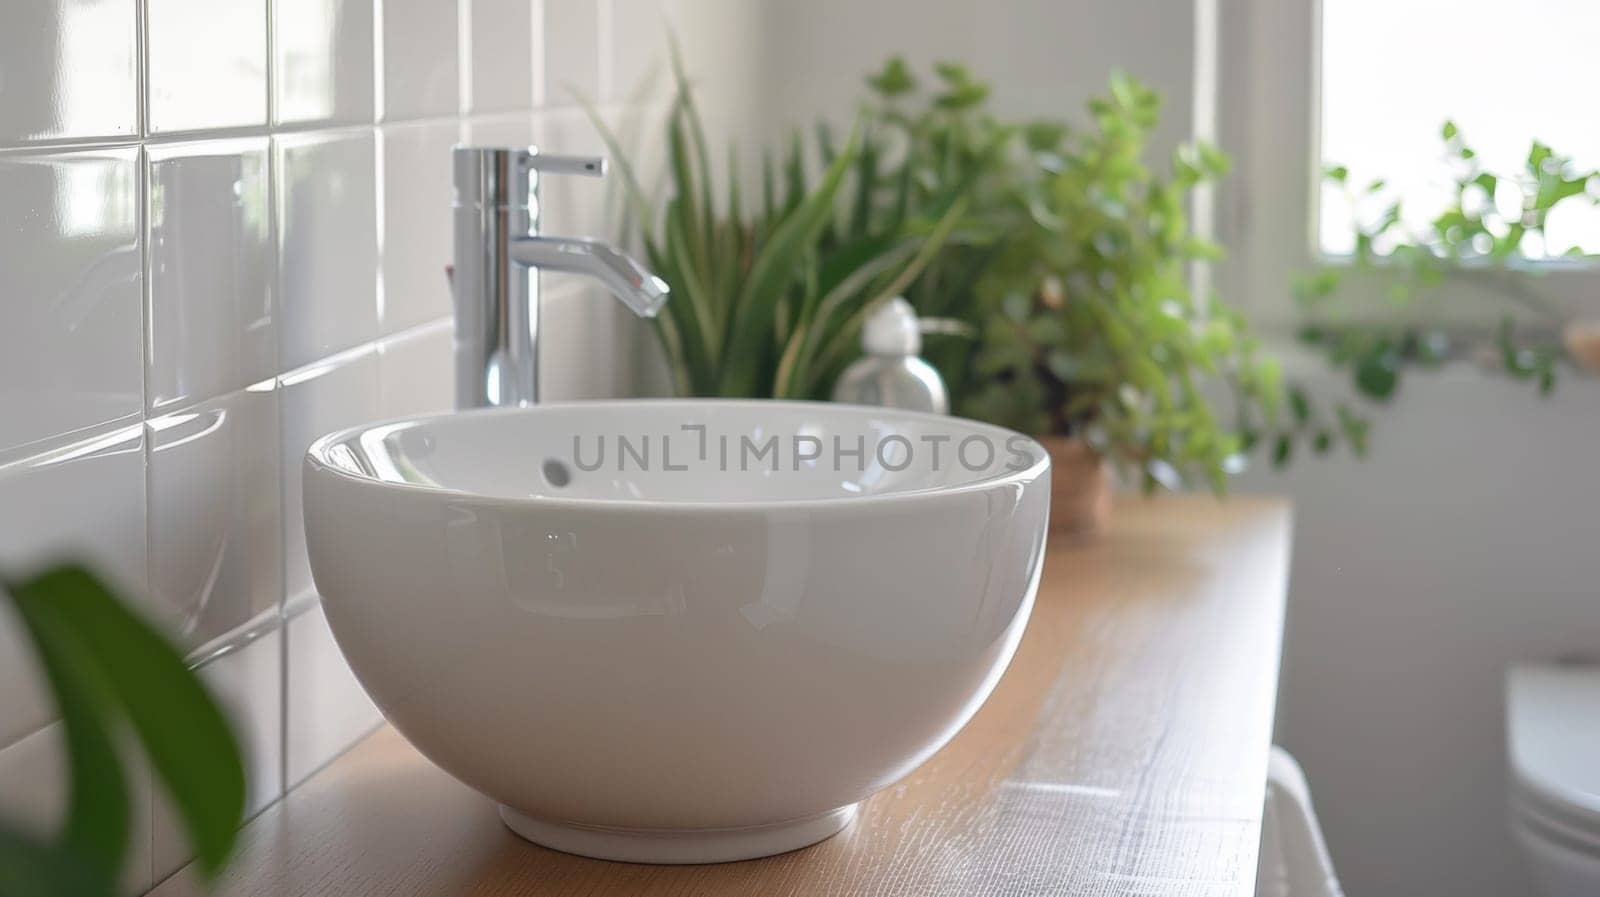 A white bowl sitting on top of a wooden counter next to some plants